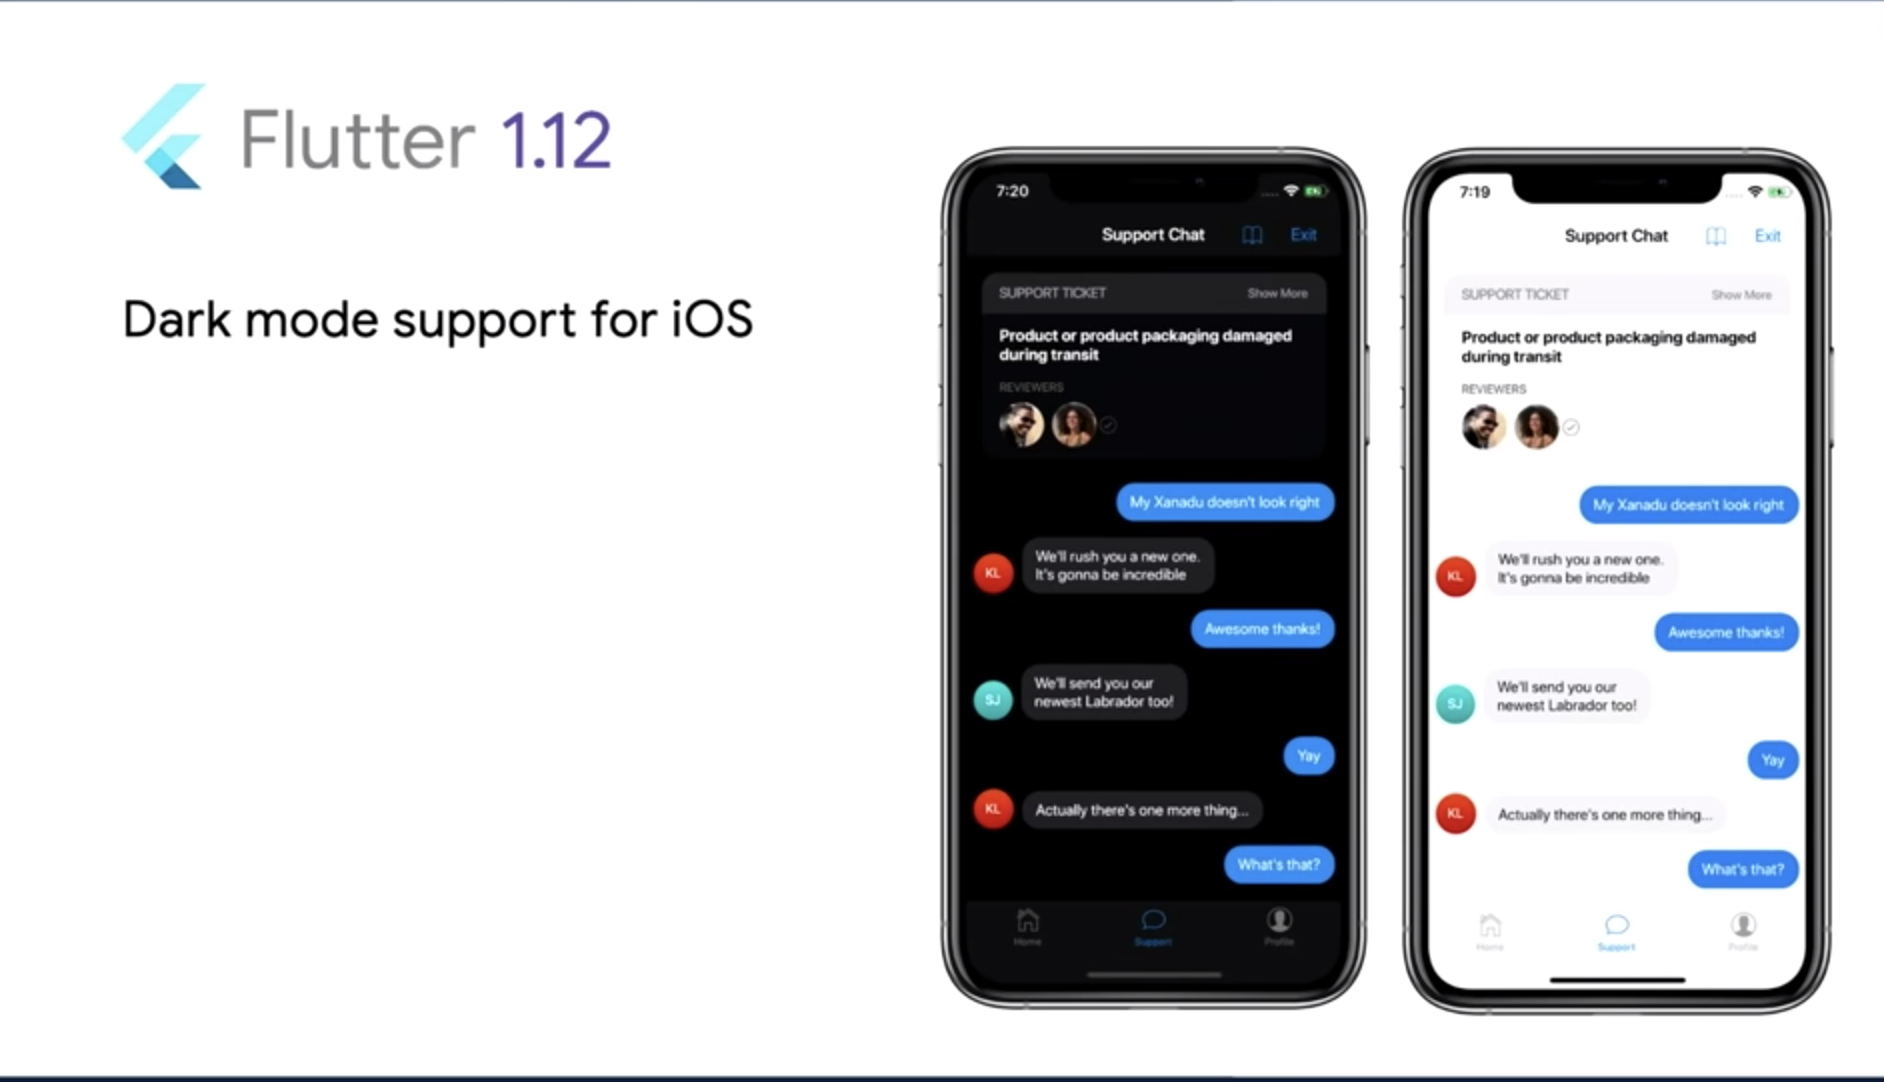 Dark mode support for iOS